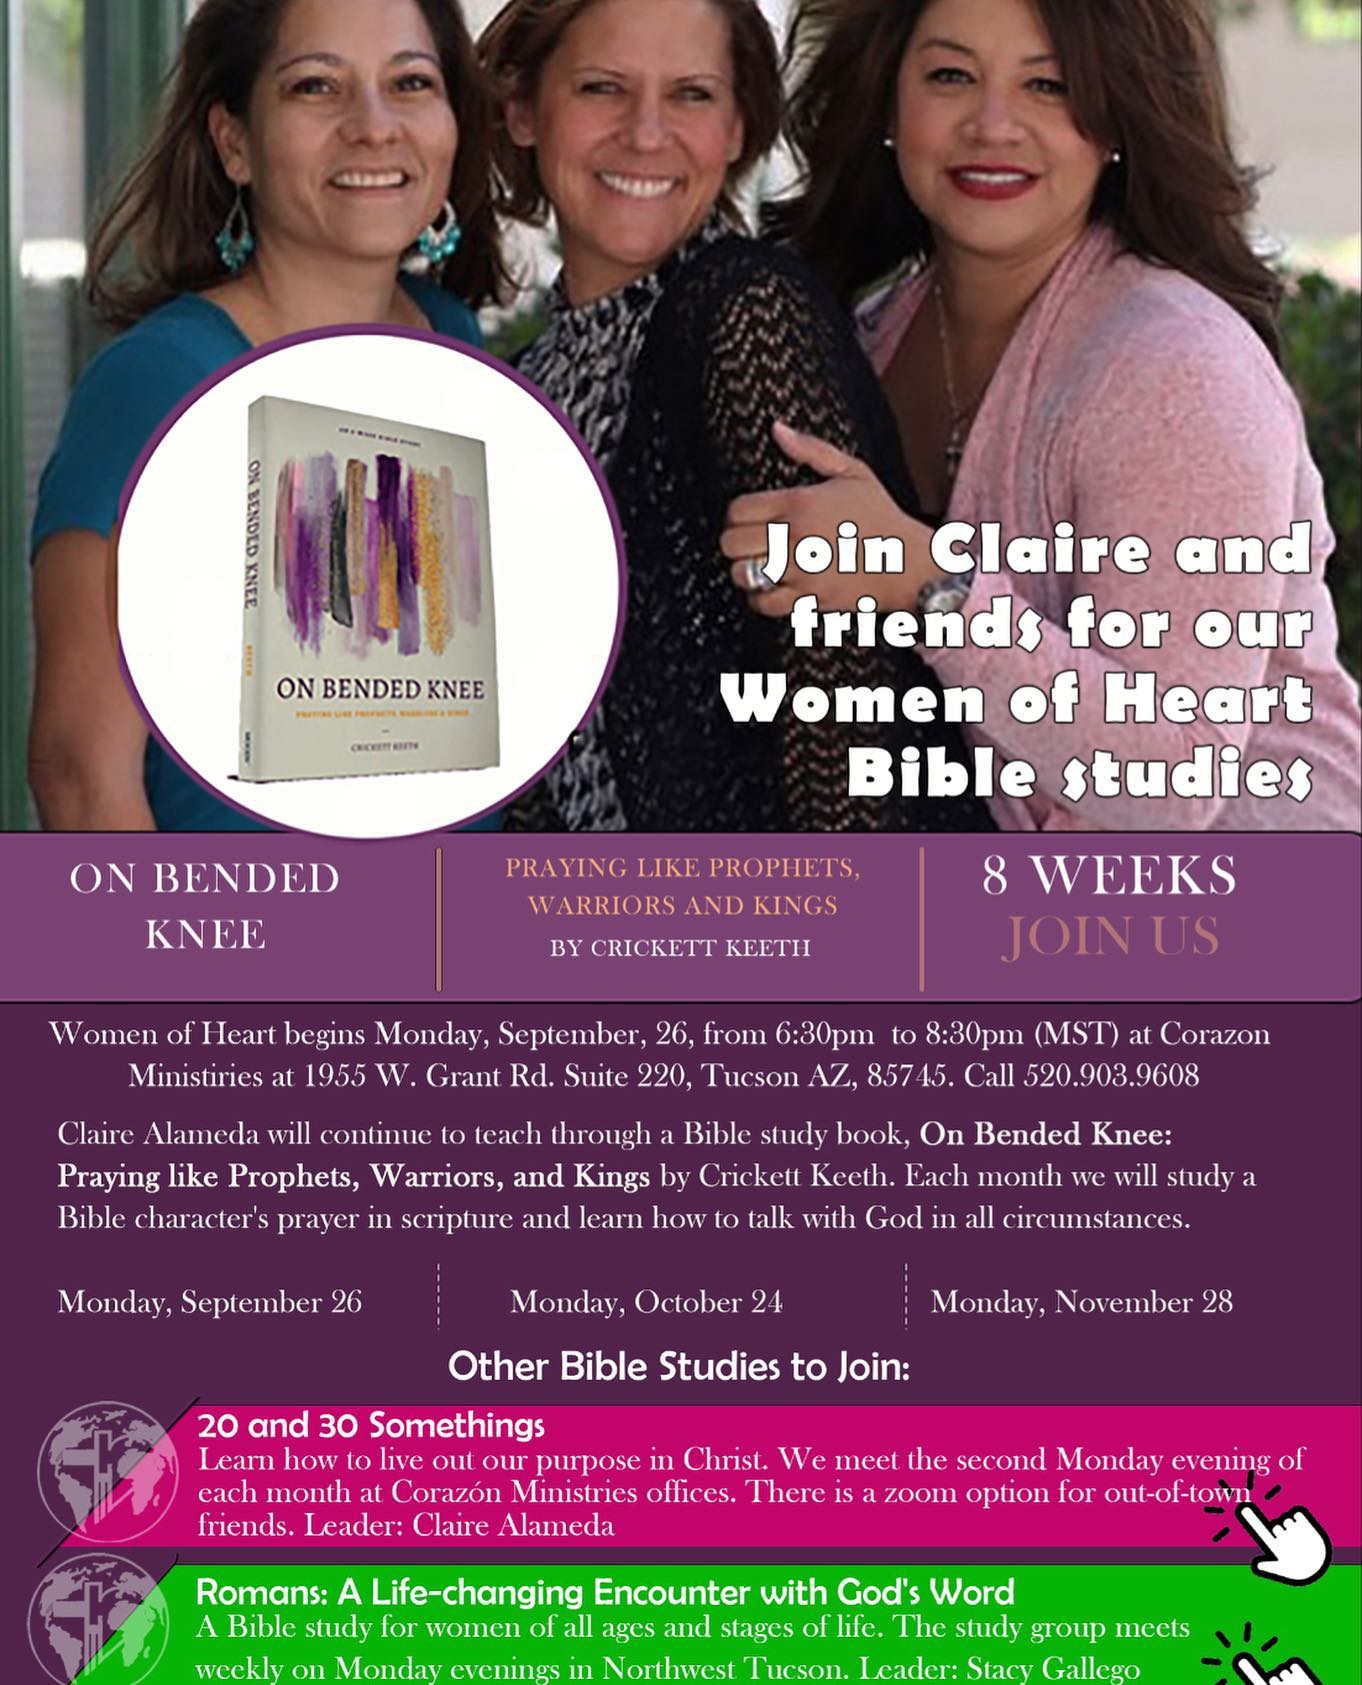 Have you heard about the latest going on at the ministry training center for women? Join us for women’s Bible studies tonight! Contact us for more information.